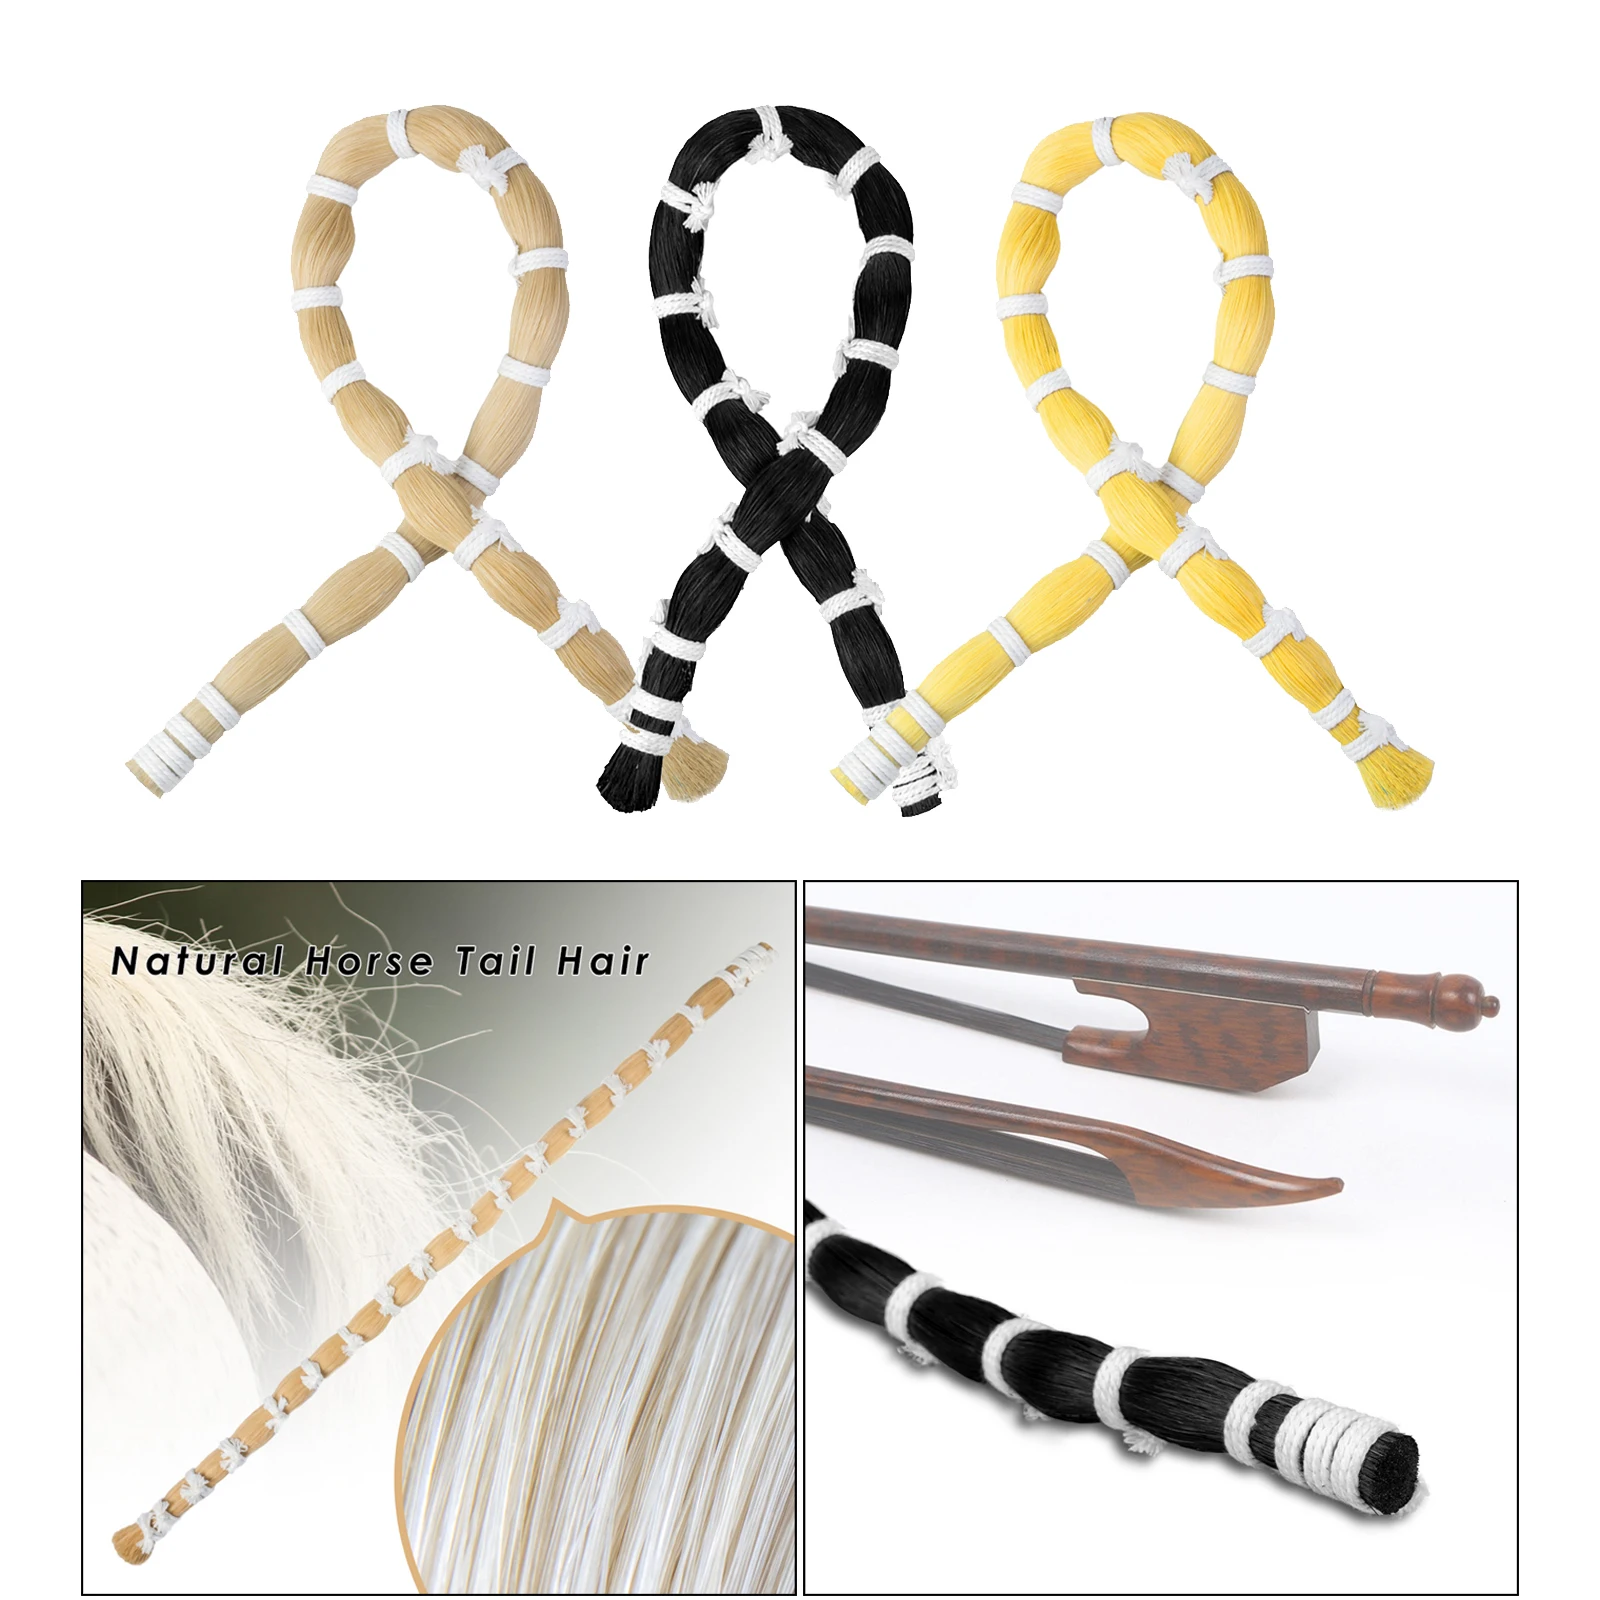 Unbleached Natural Mongolian Horsehair Bow for Violin Fiddle Accessories